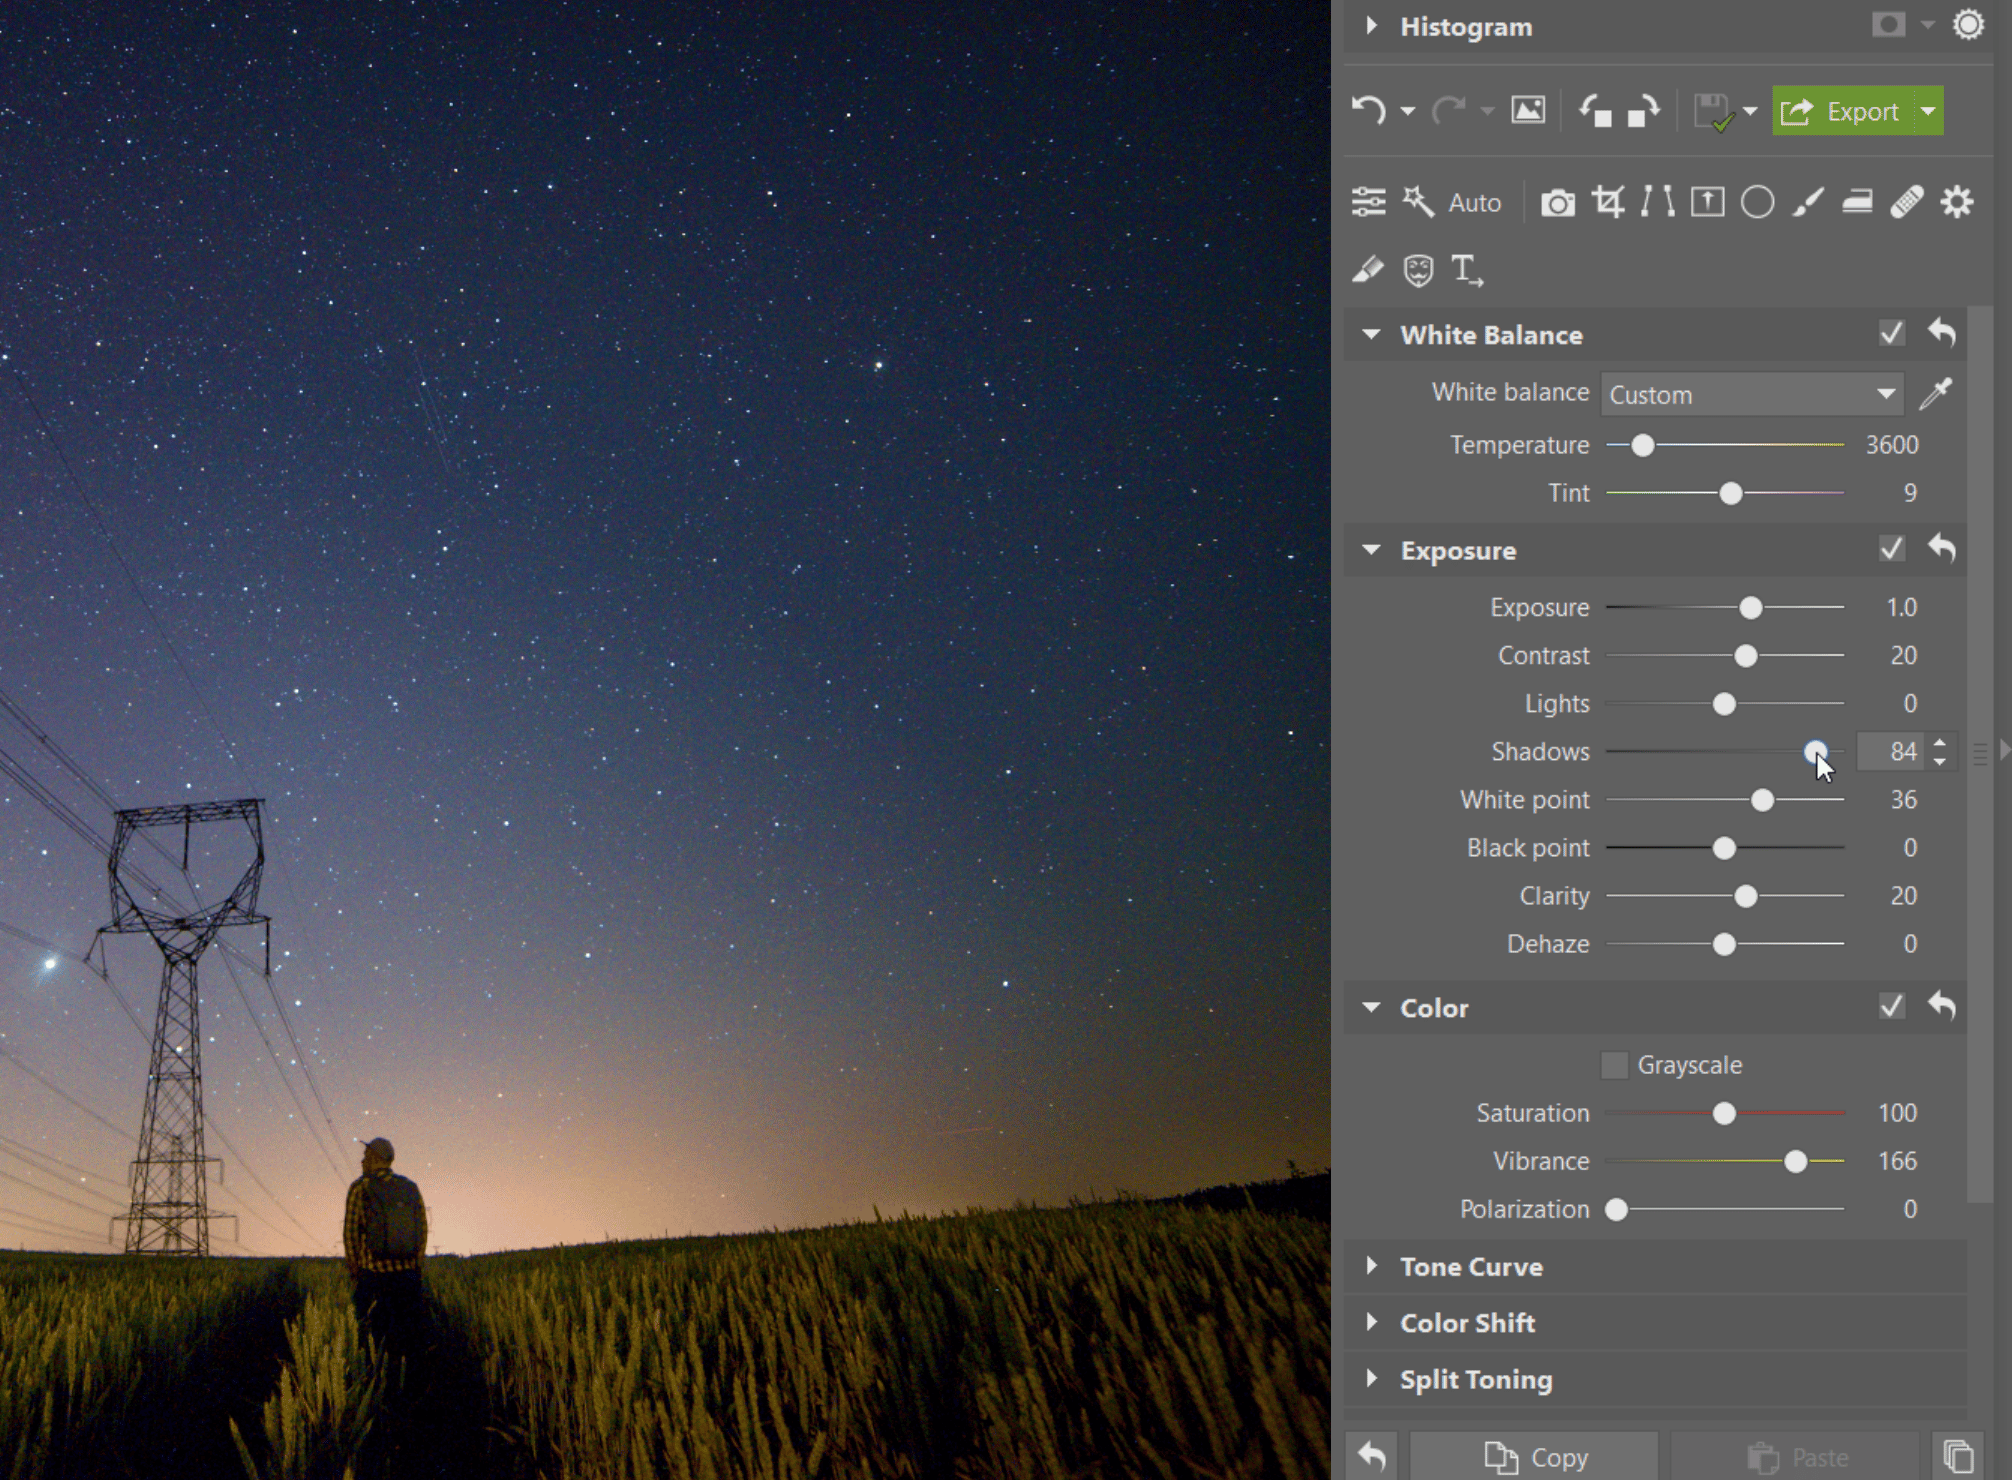 Night-sky Photos: 7 Edits (+1 More) That Will Definitely Spice Them Up